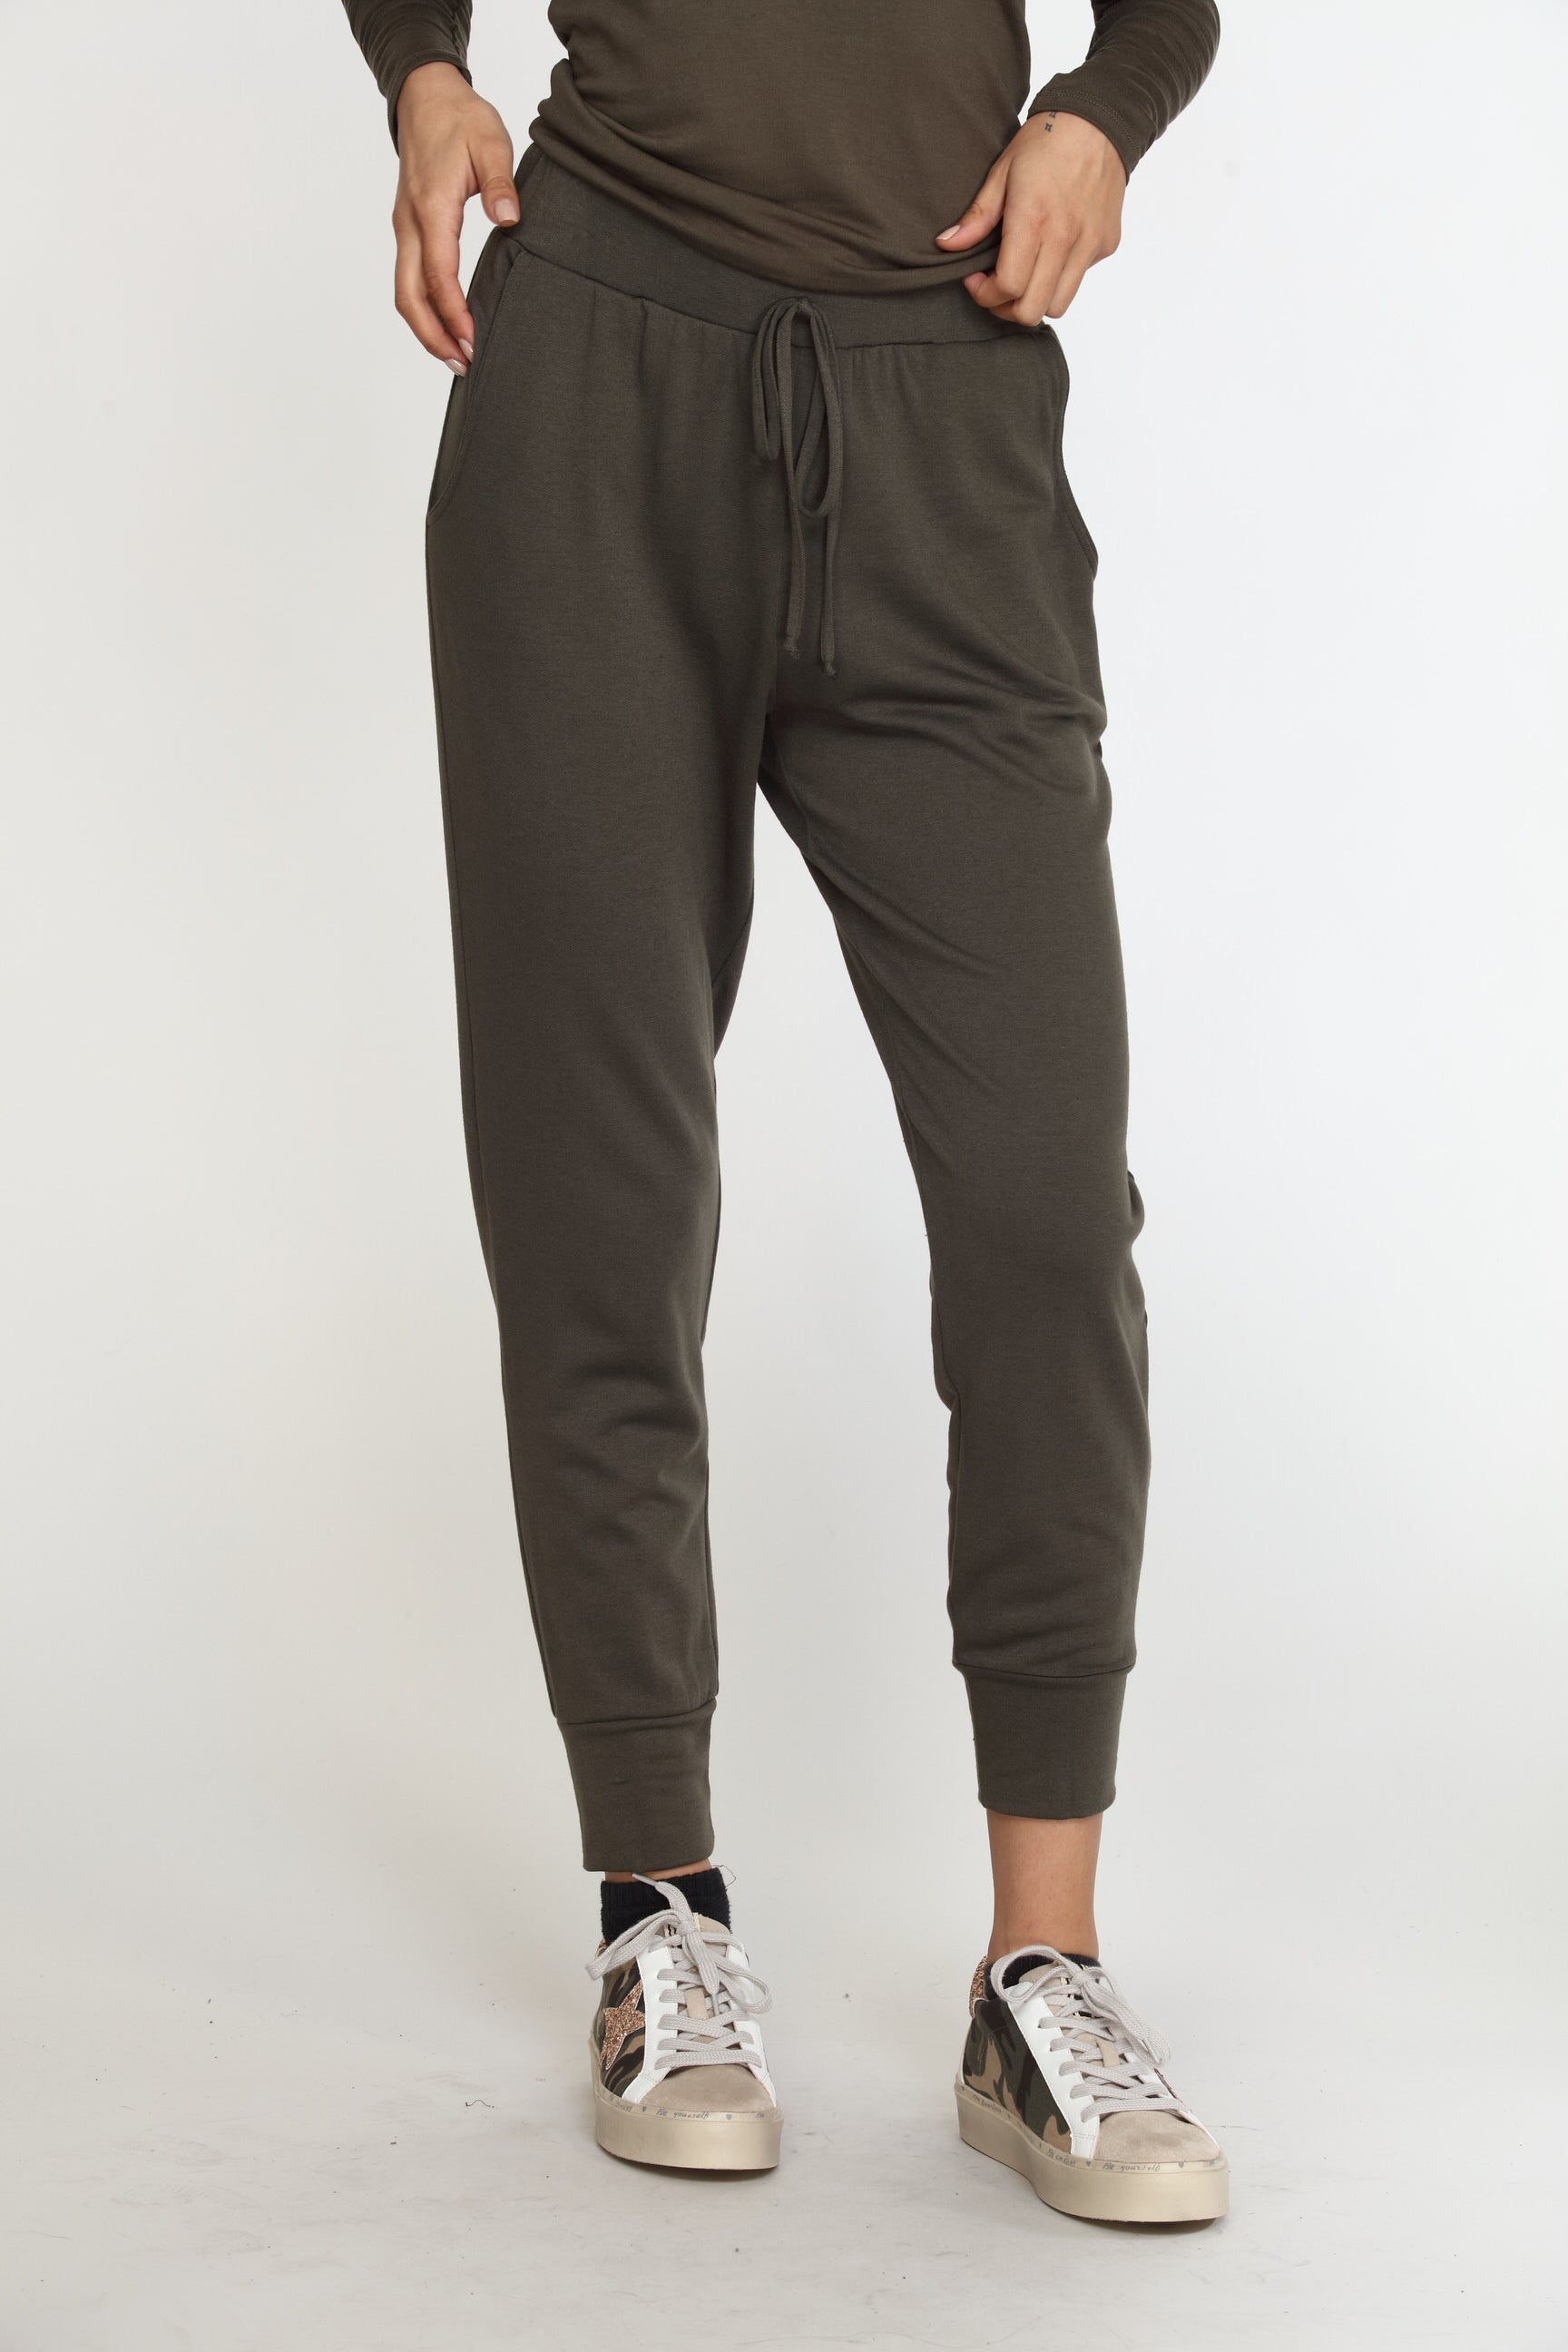 Olive Soft French Terry Joggers - FINAL SALE